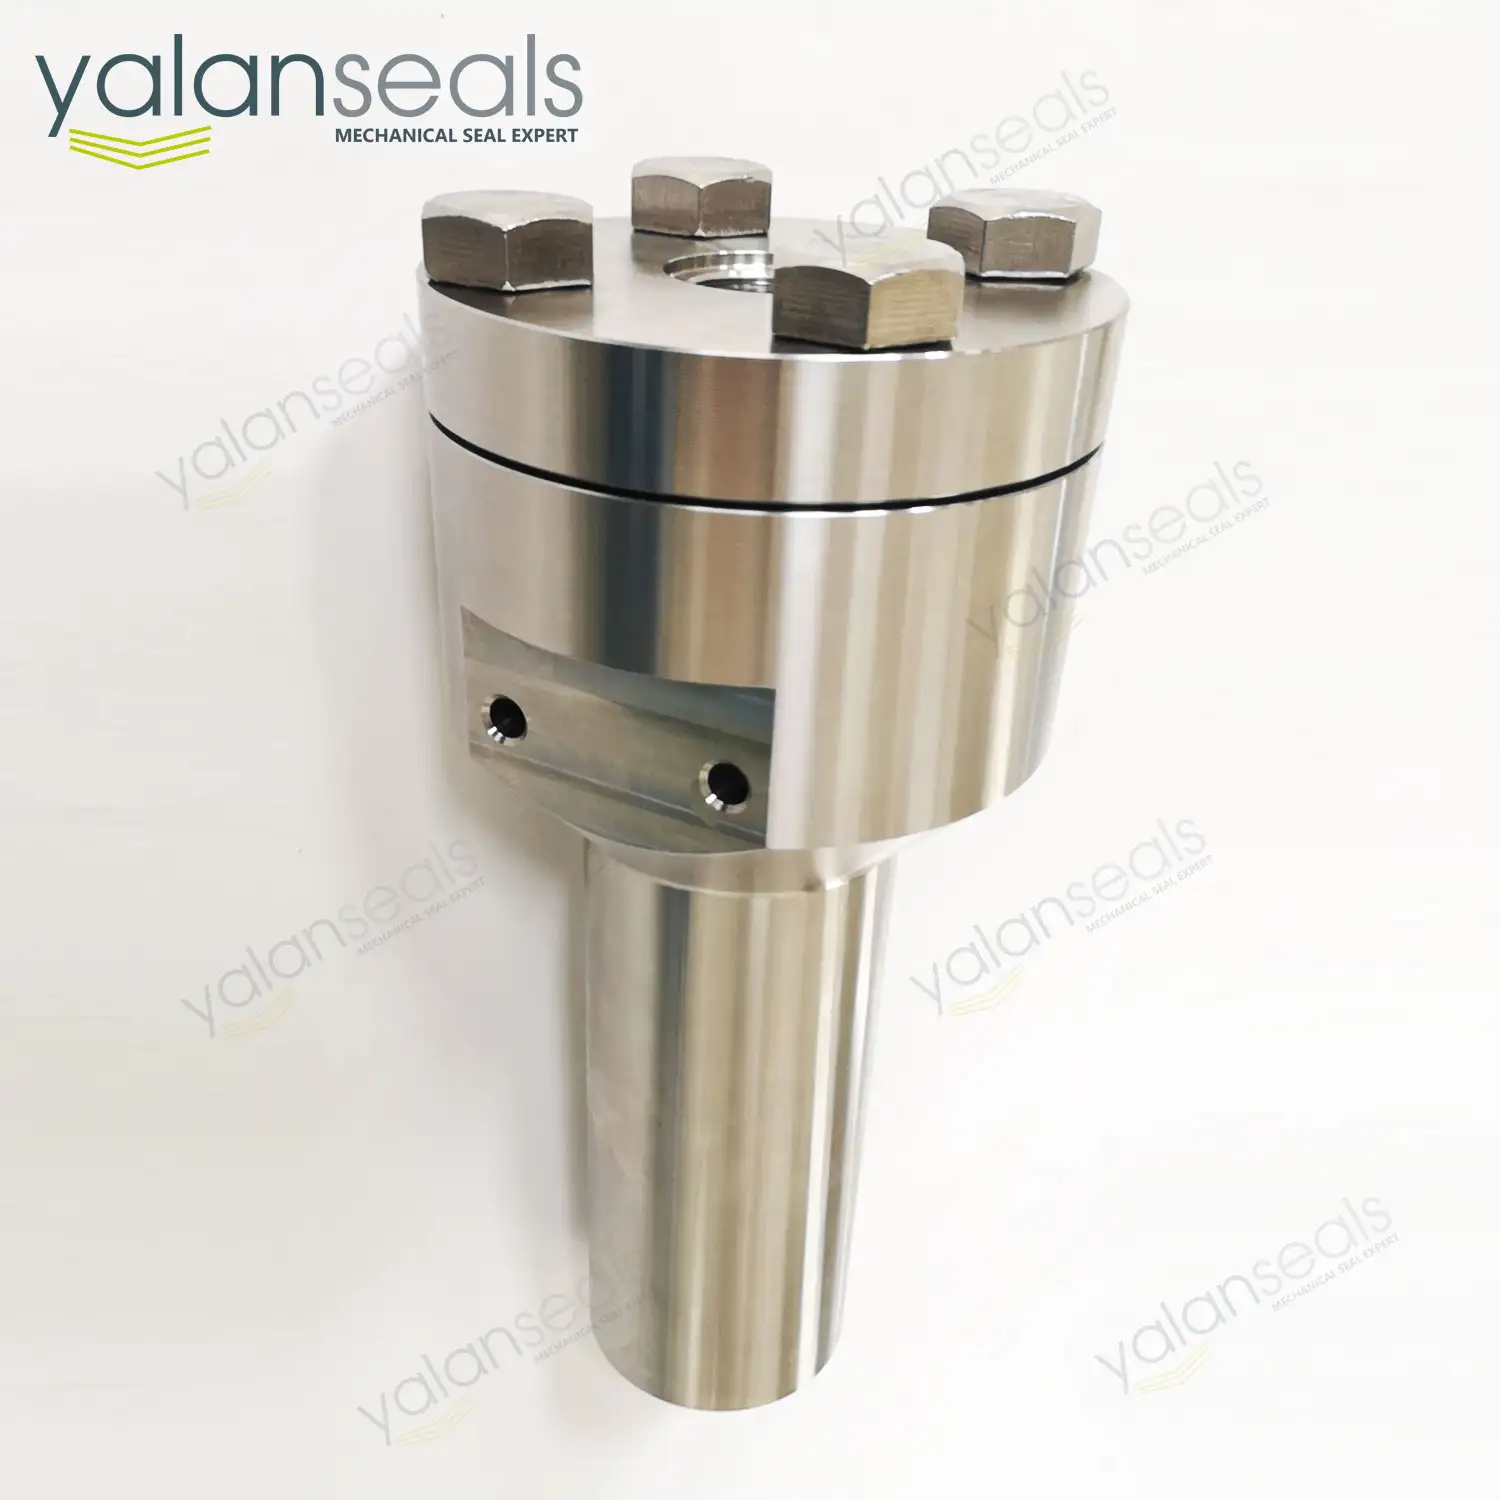 Stainless Steel Core with Ceramic Coating Shaft Sleeve - YALAN Seals -  China Mechanical Seal Standard Maker